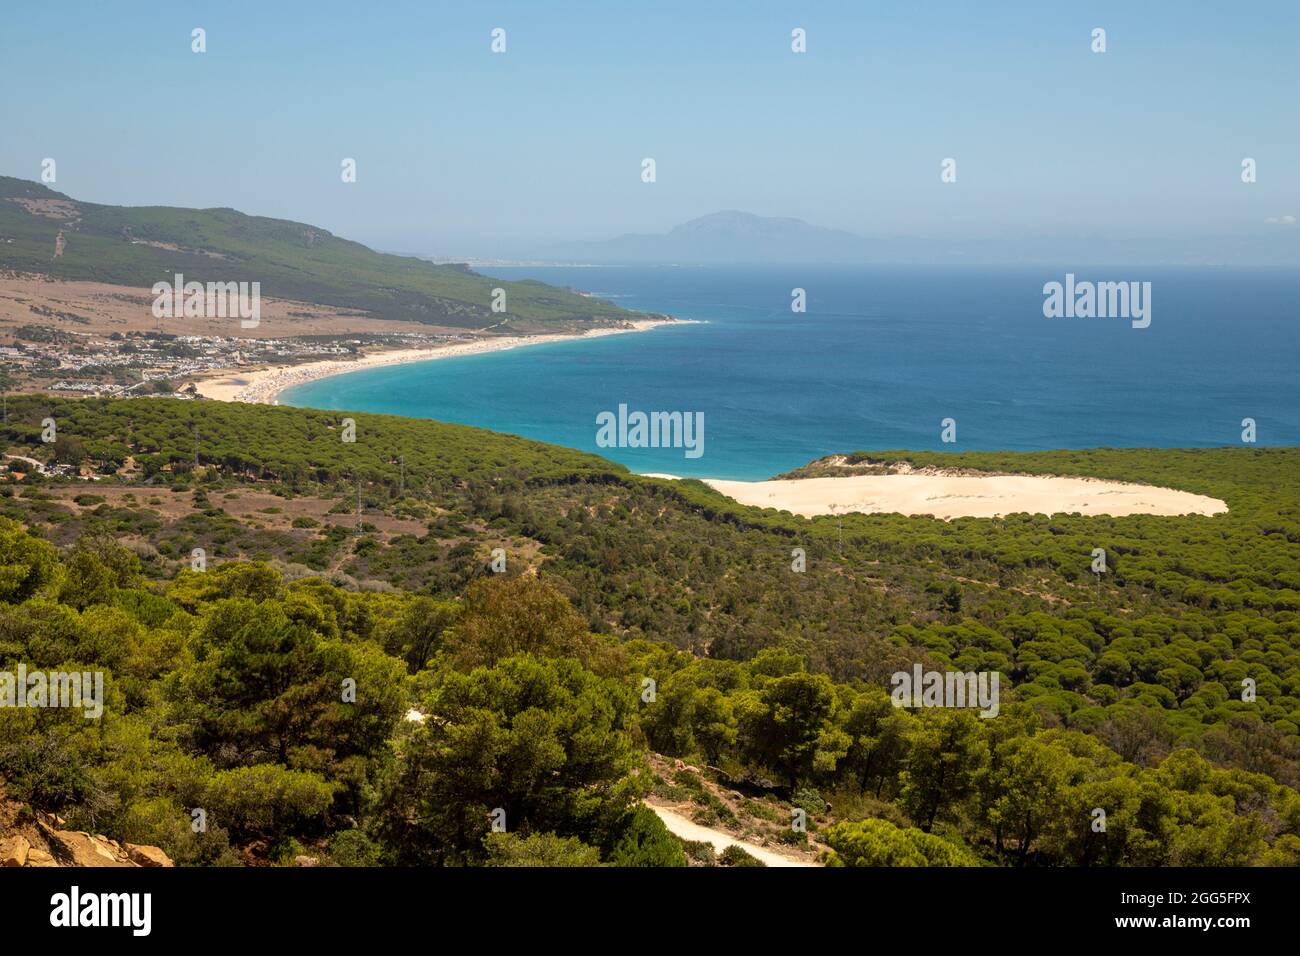 Bolonia Dune seen from the viewpoint is located on the Atlantic coast of the province of Cádiz (Spain) You can see Africa on clear days as it is in th Stock Photo